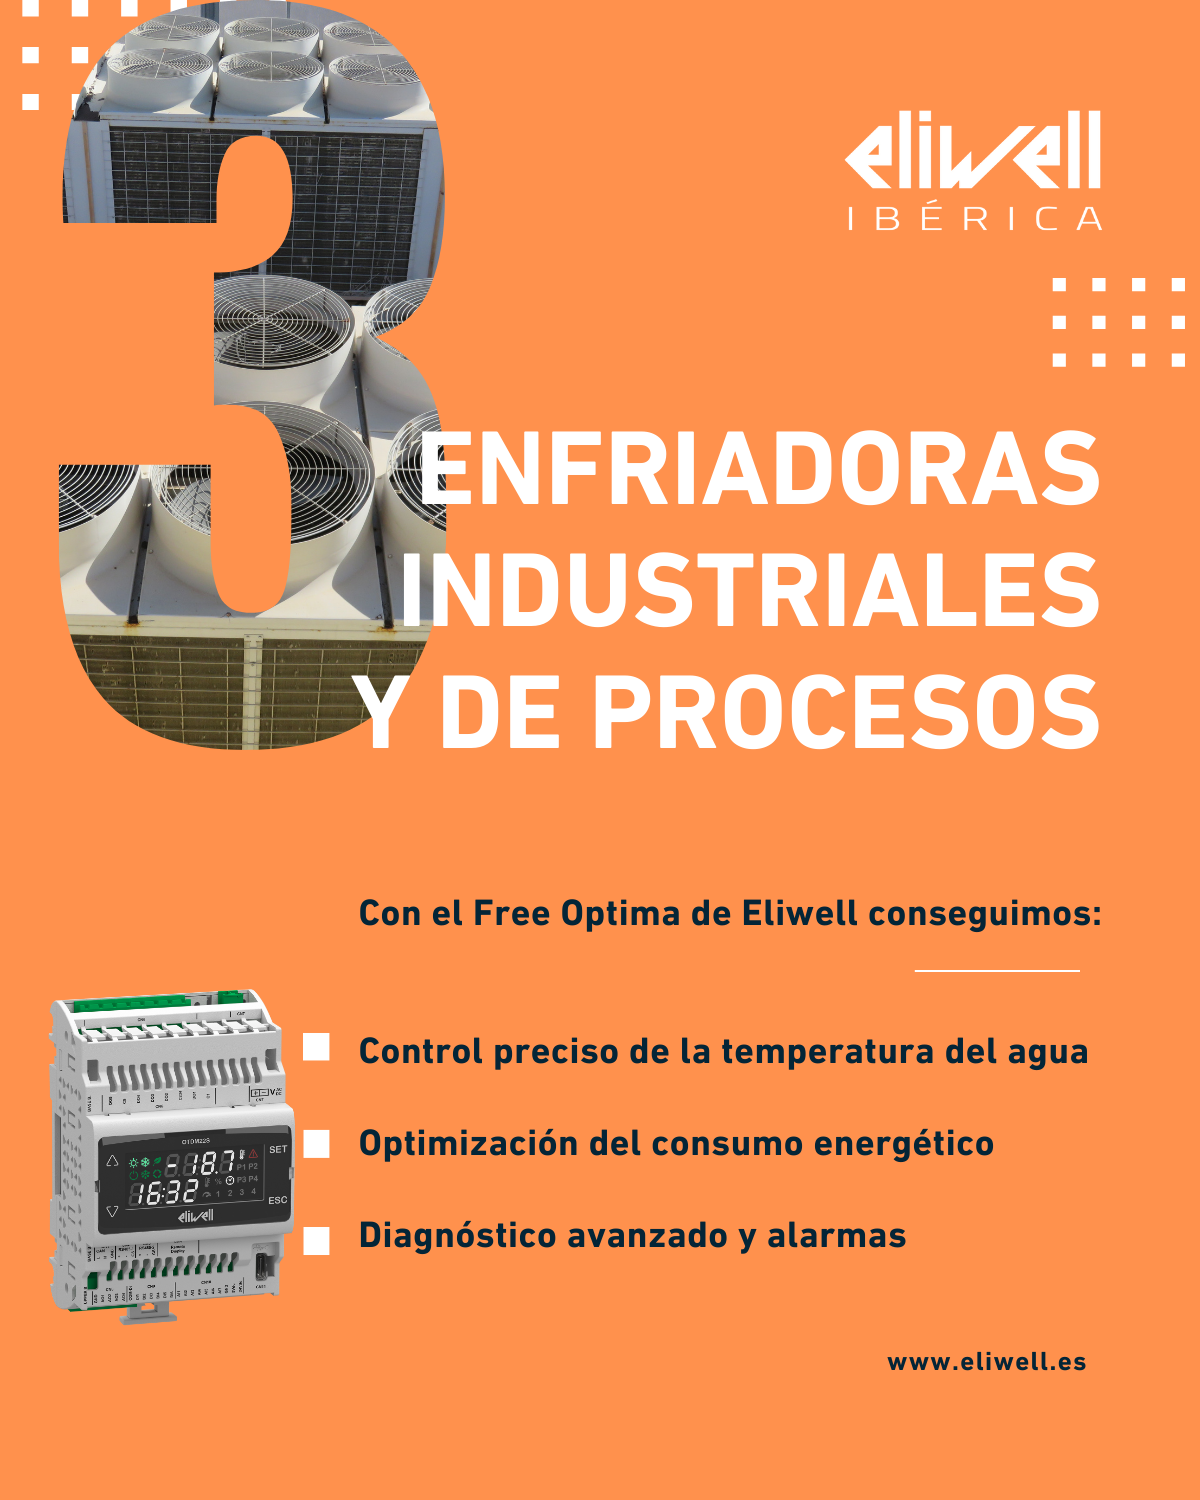 advantages of the Eliwell PLC in Industrial and Process Coolers